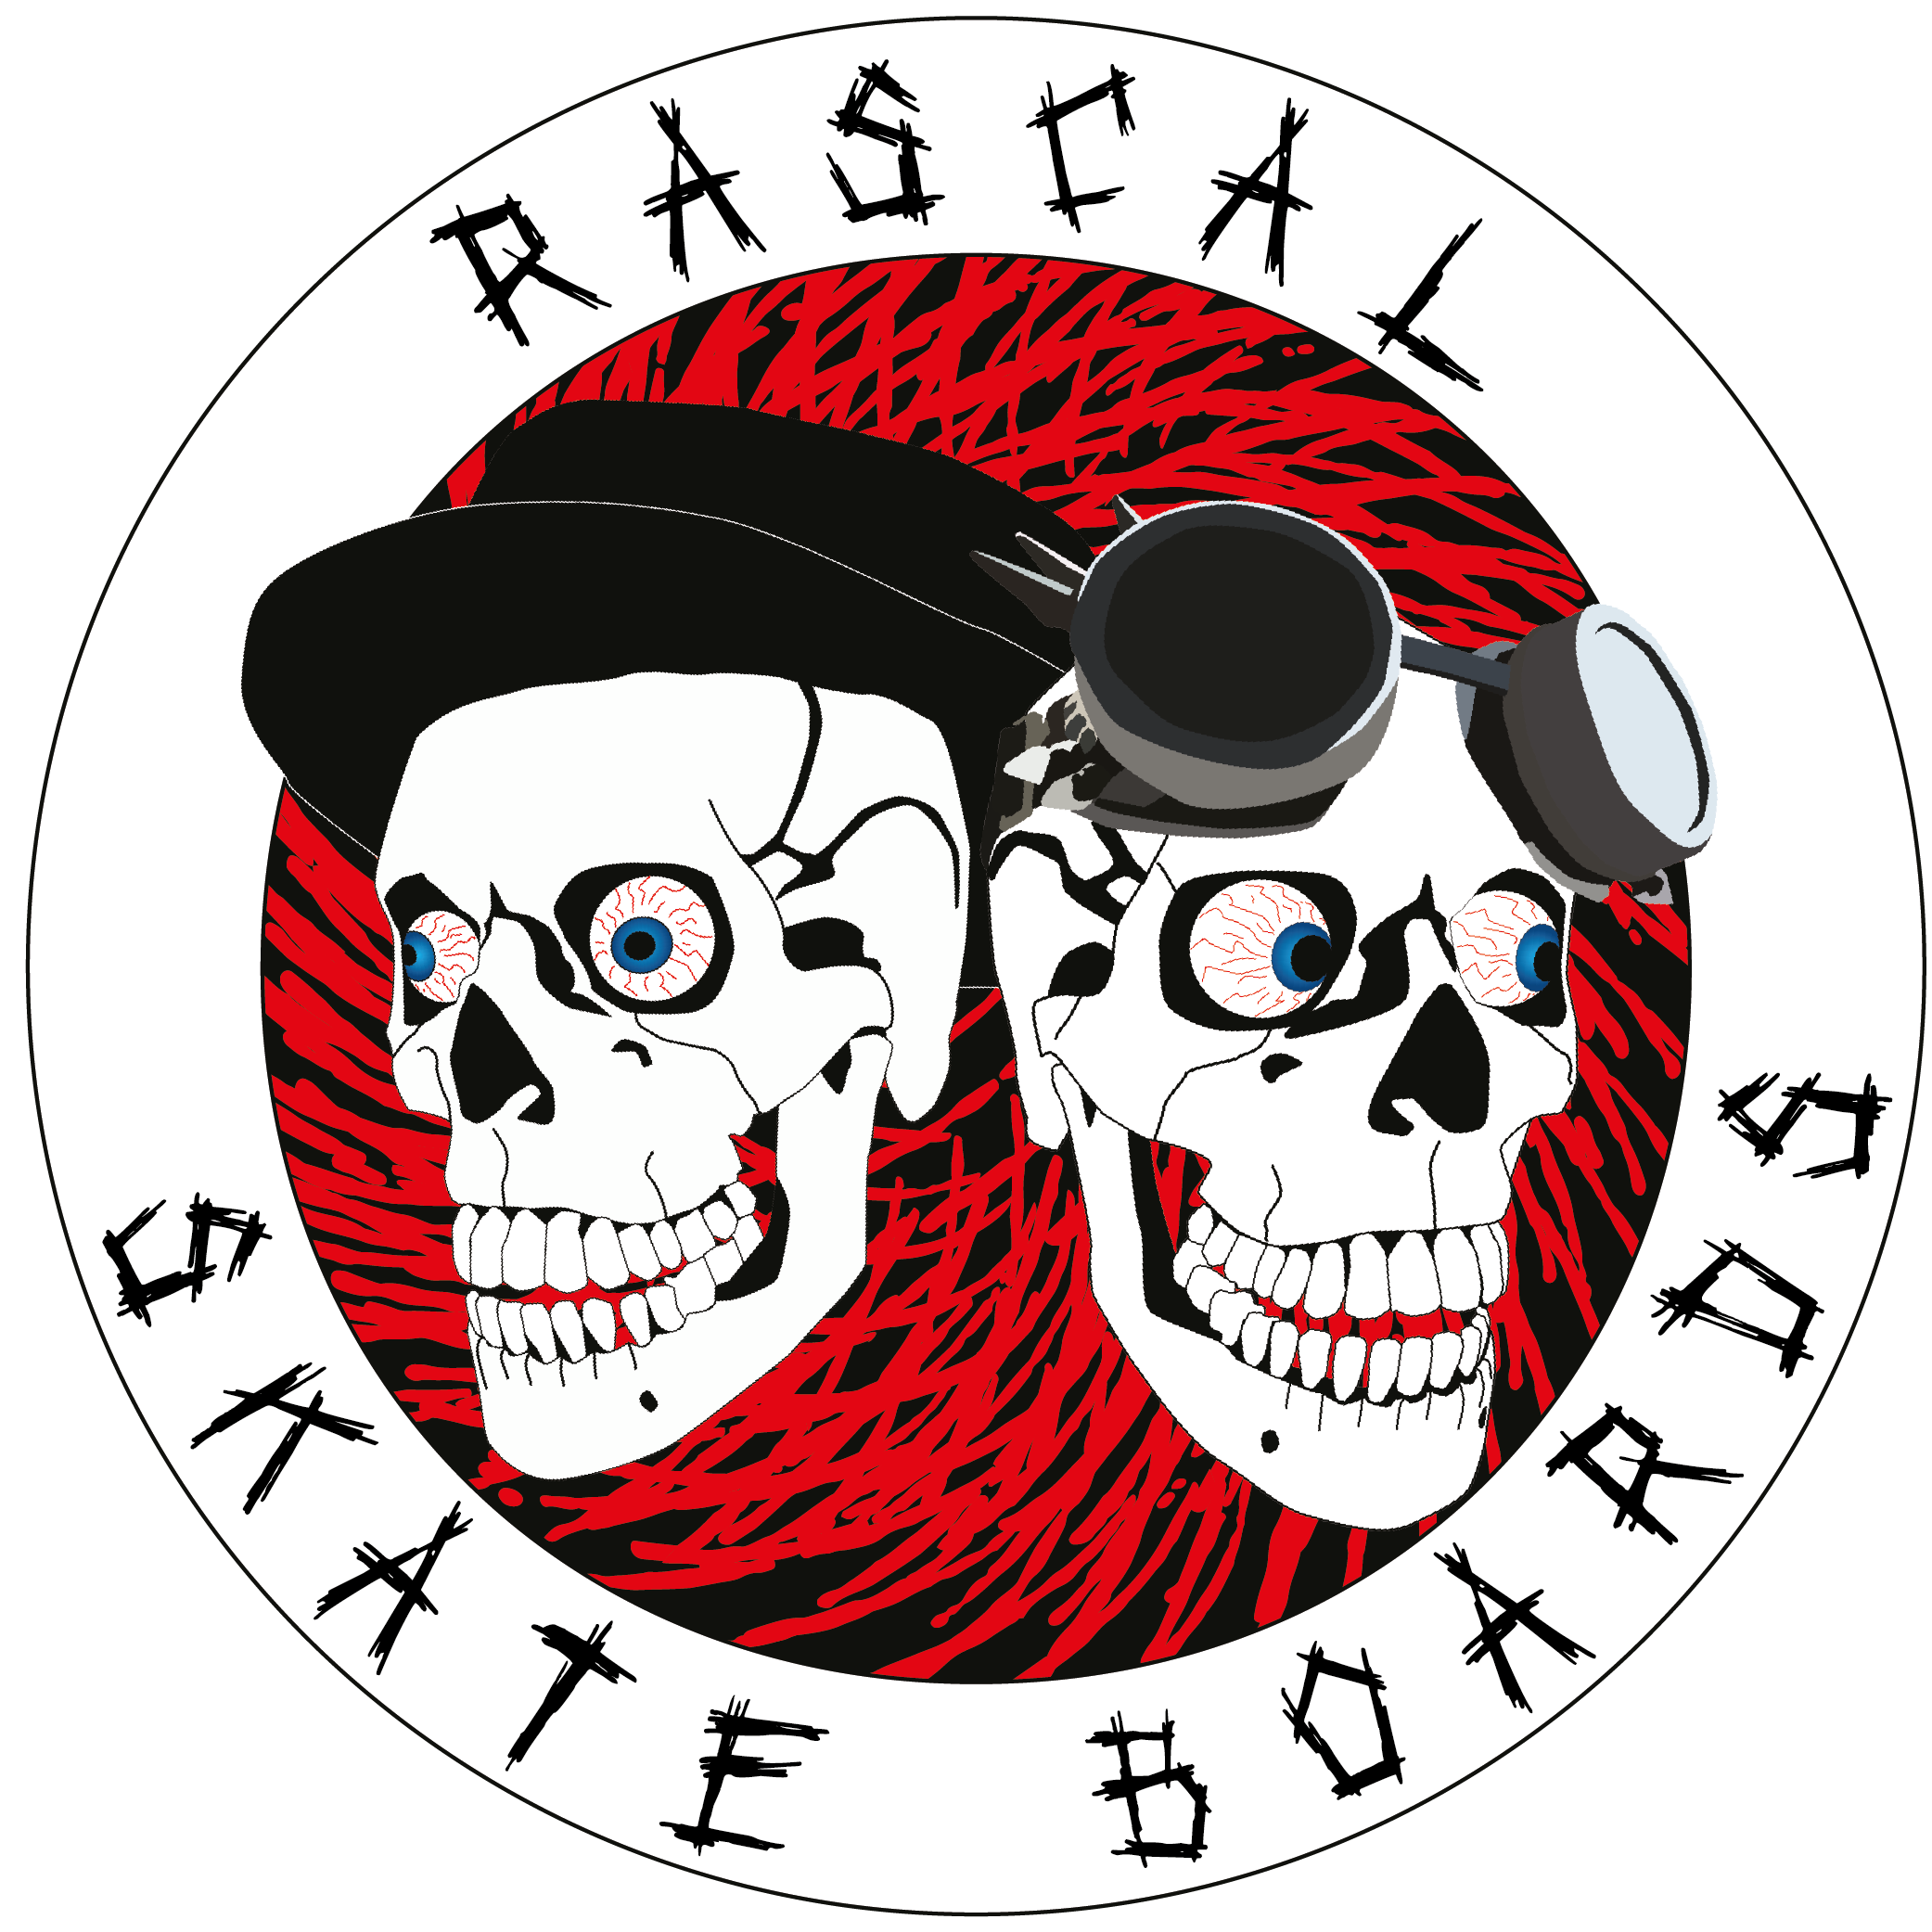 Rascal Skateboards Logo from my course work